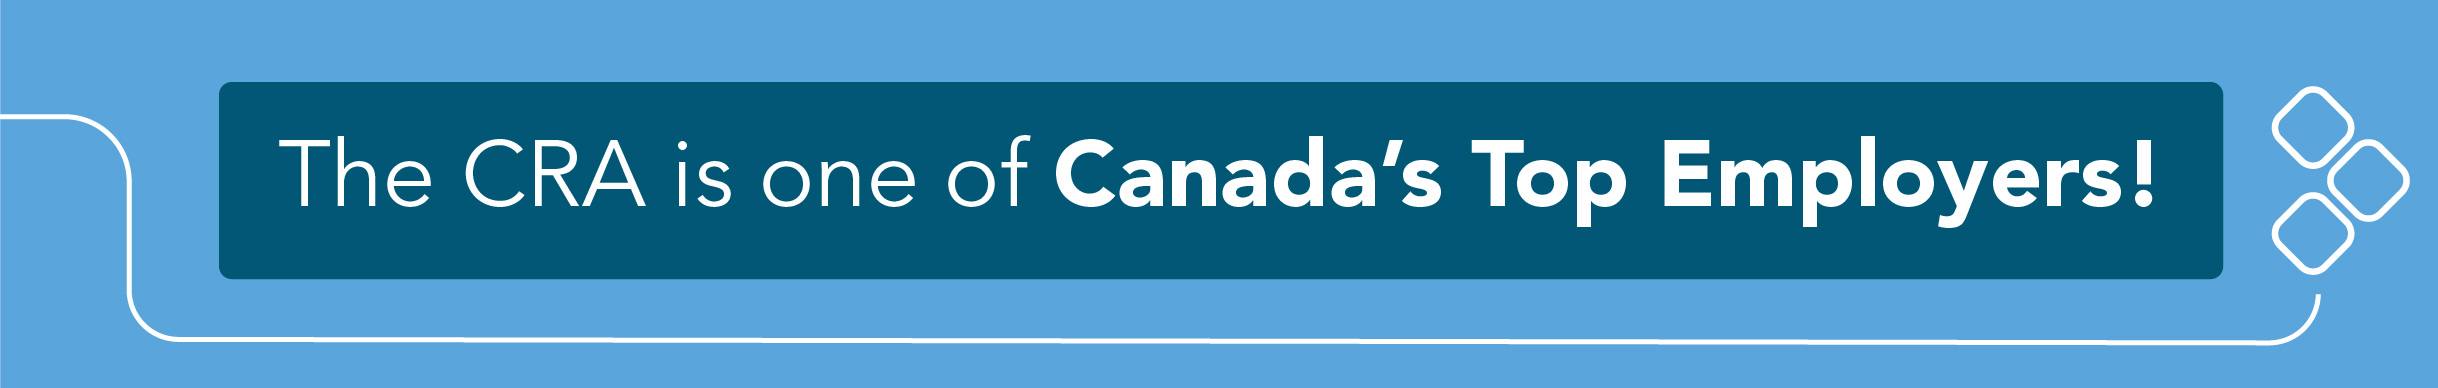 The CRA is one of Canada’s Top Employers!